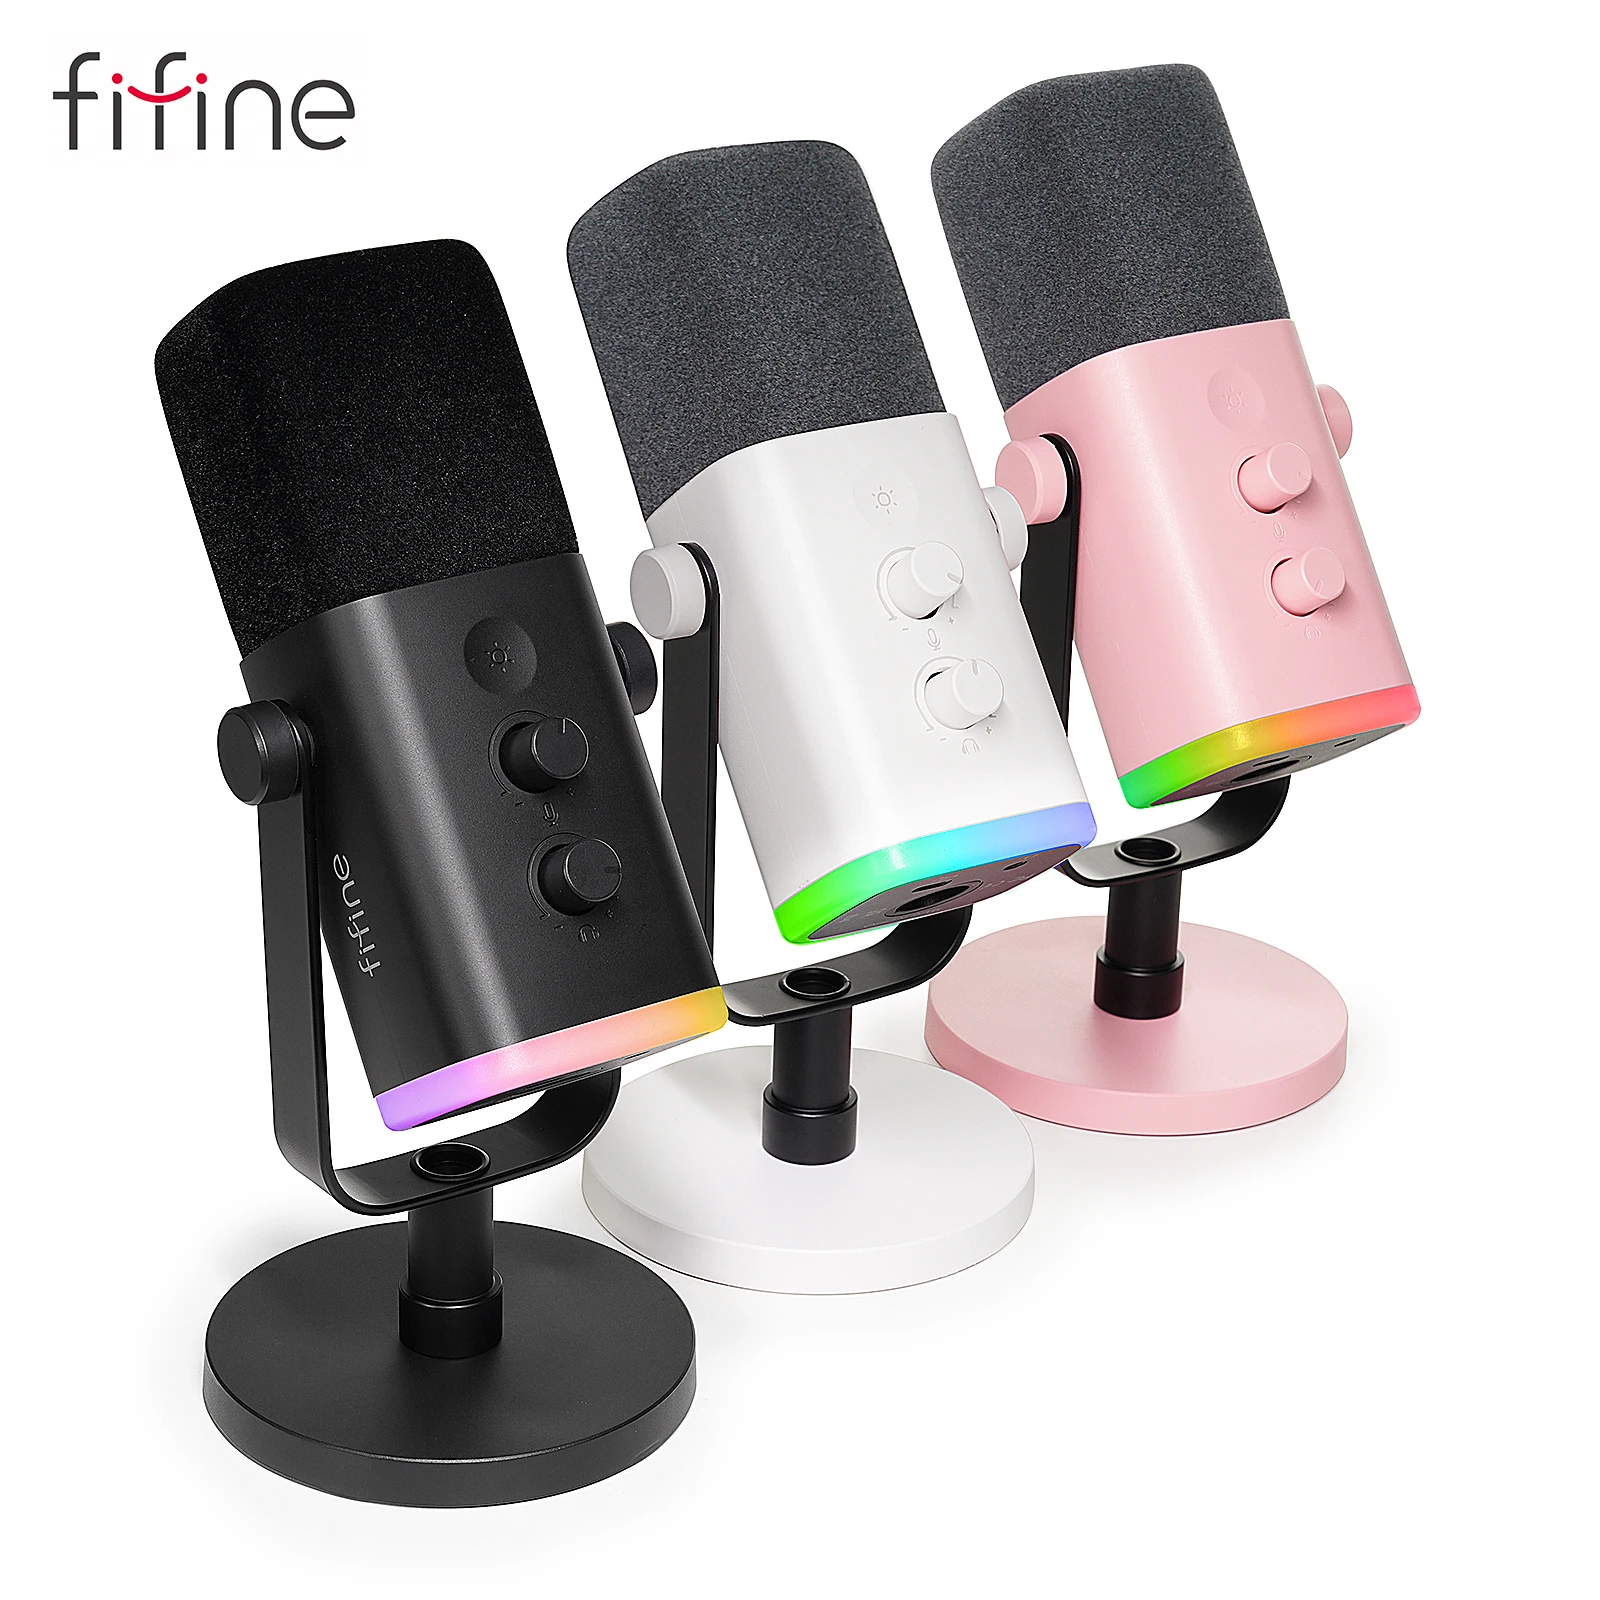 FIFINE AM8 XLR/USB Dynamic Microphone for Podcast Recording, PC Computer  Gaming Streaming Mic with RGB Light